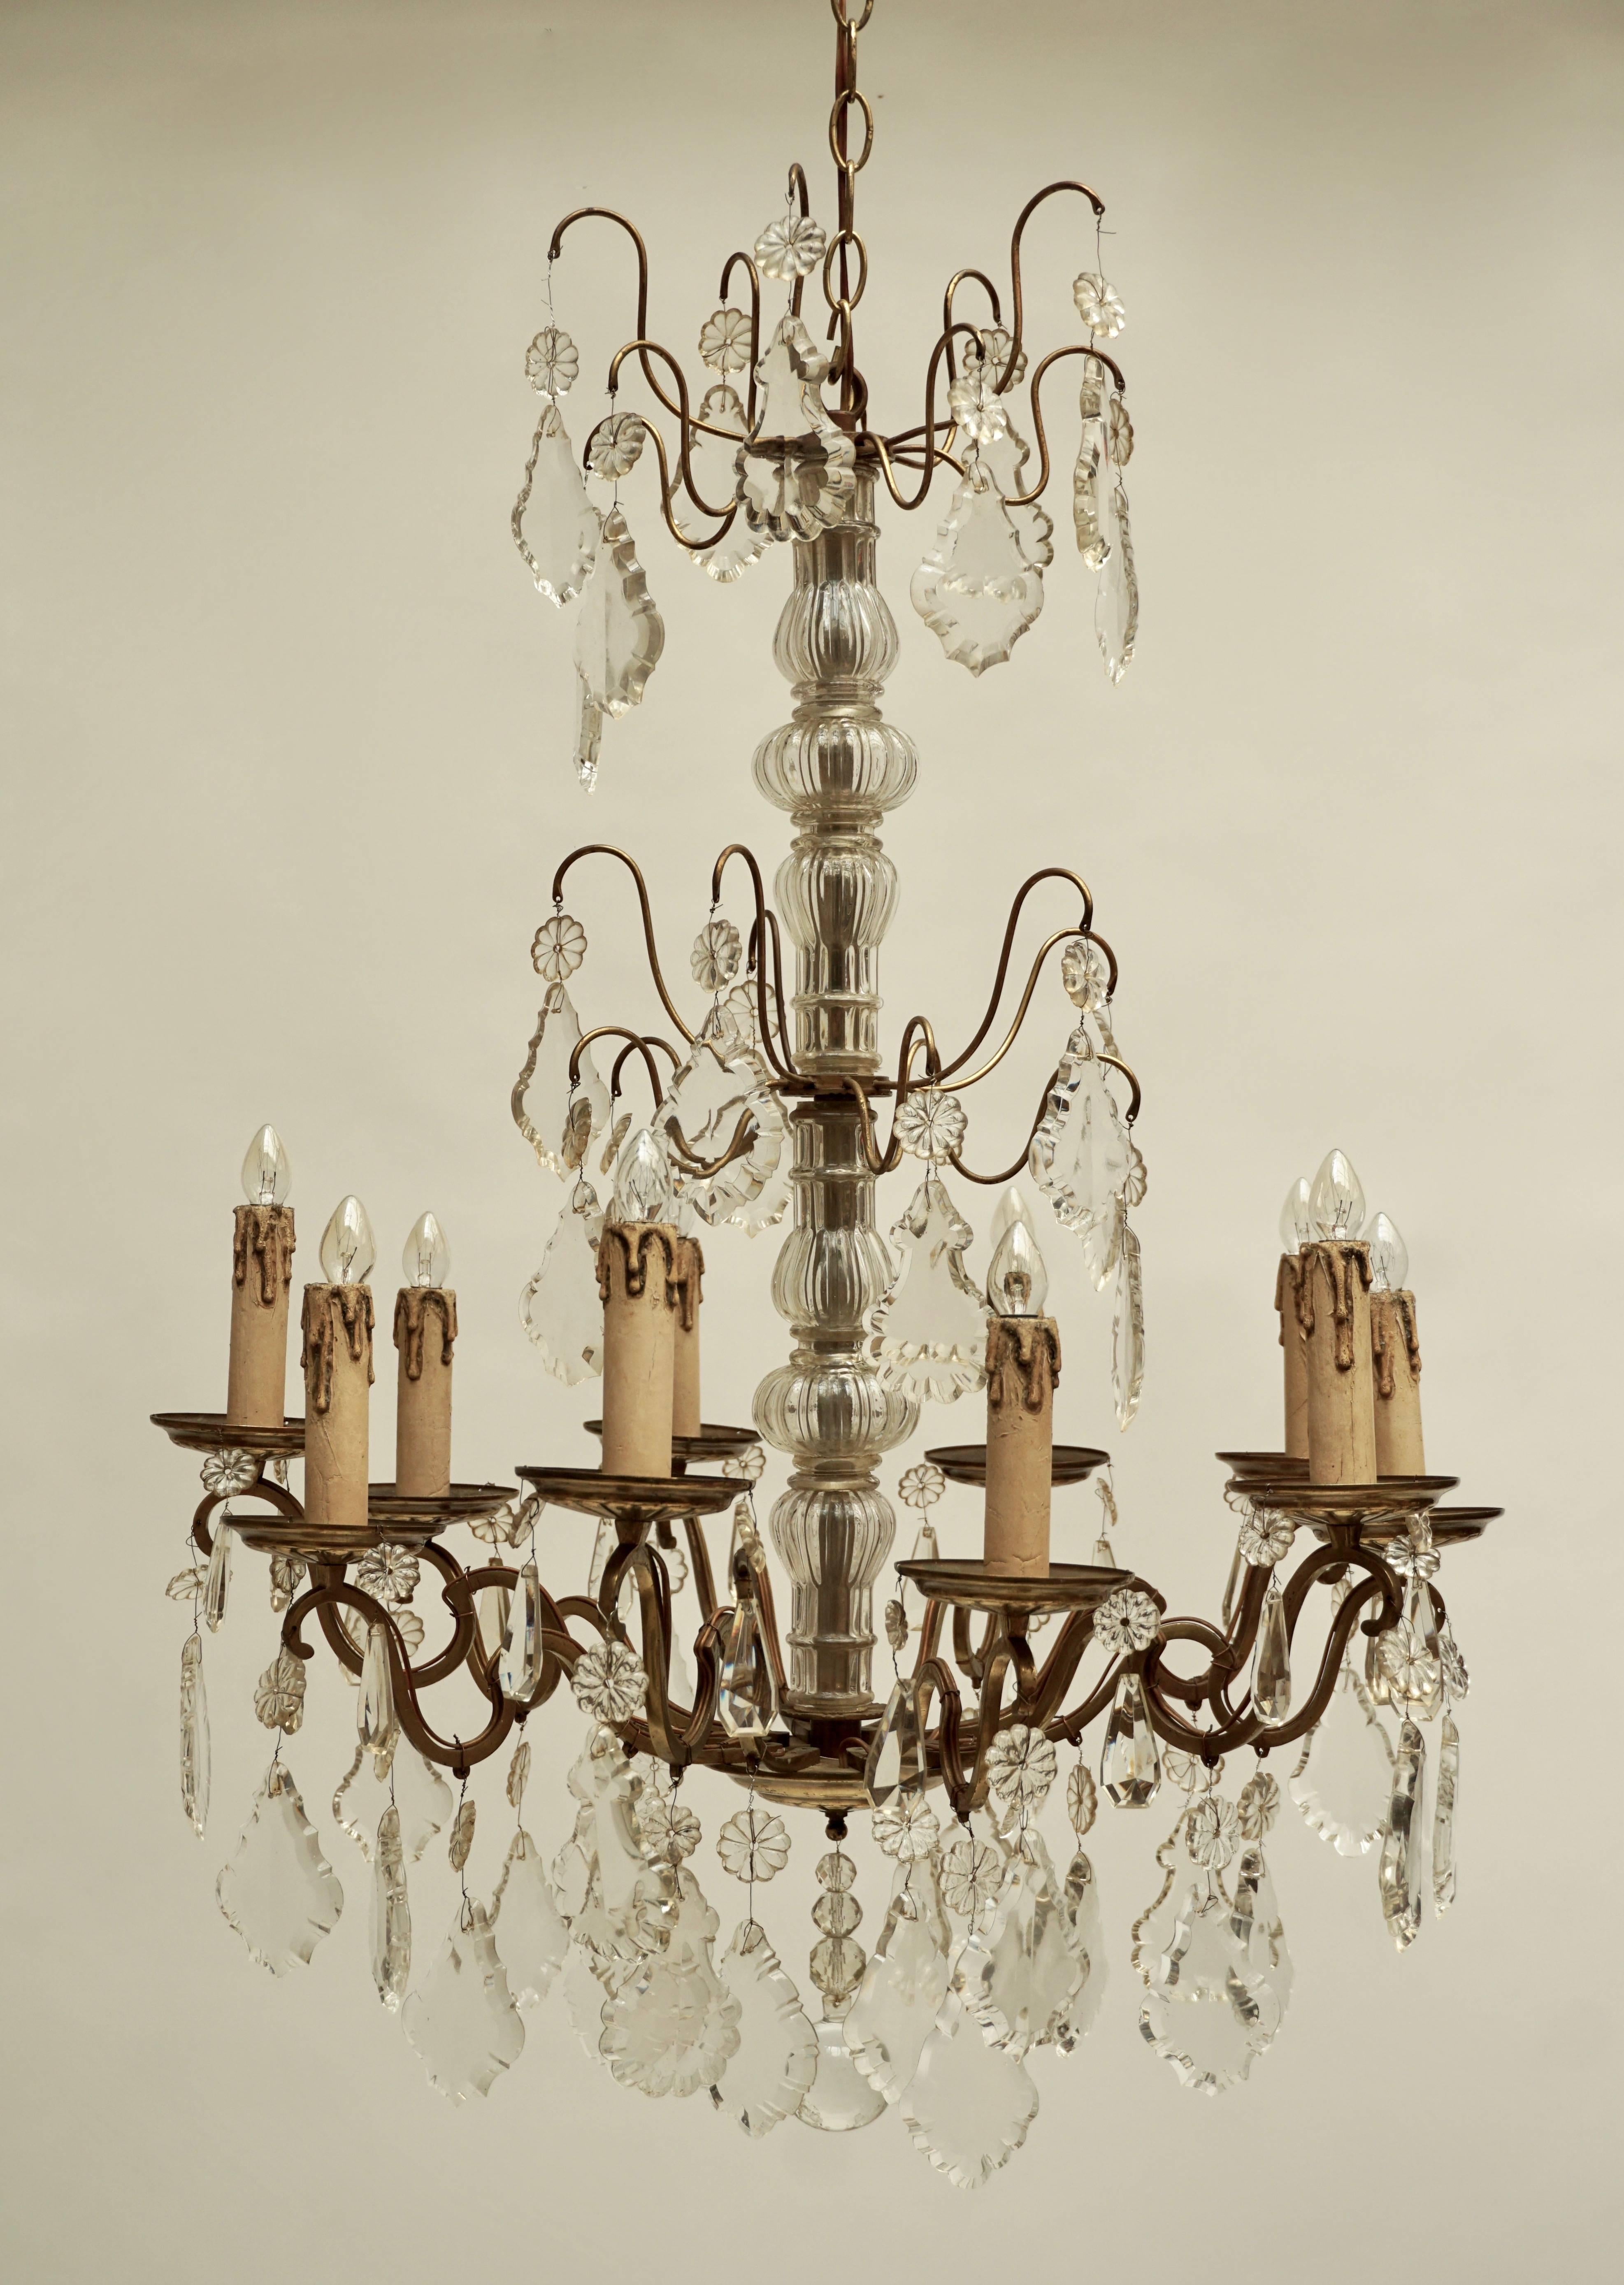 Brass and crystal glass chandelier with ten arms.
Height fixture 83 cm.
Total height with the chain 112 cm.
Diameter 60 cm.
Ten E14 bulbs.